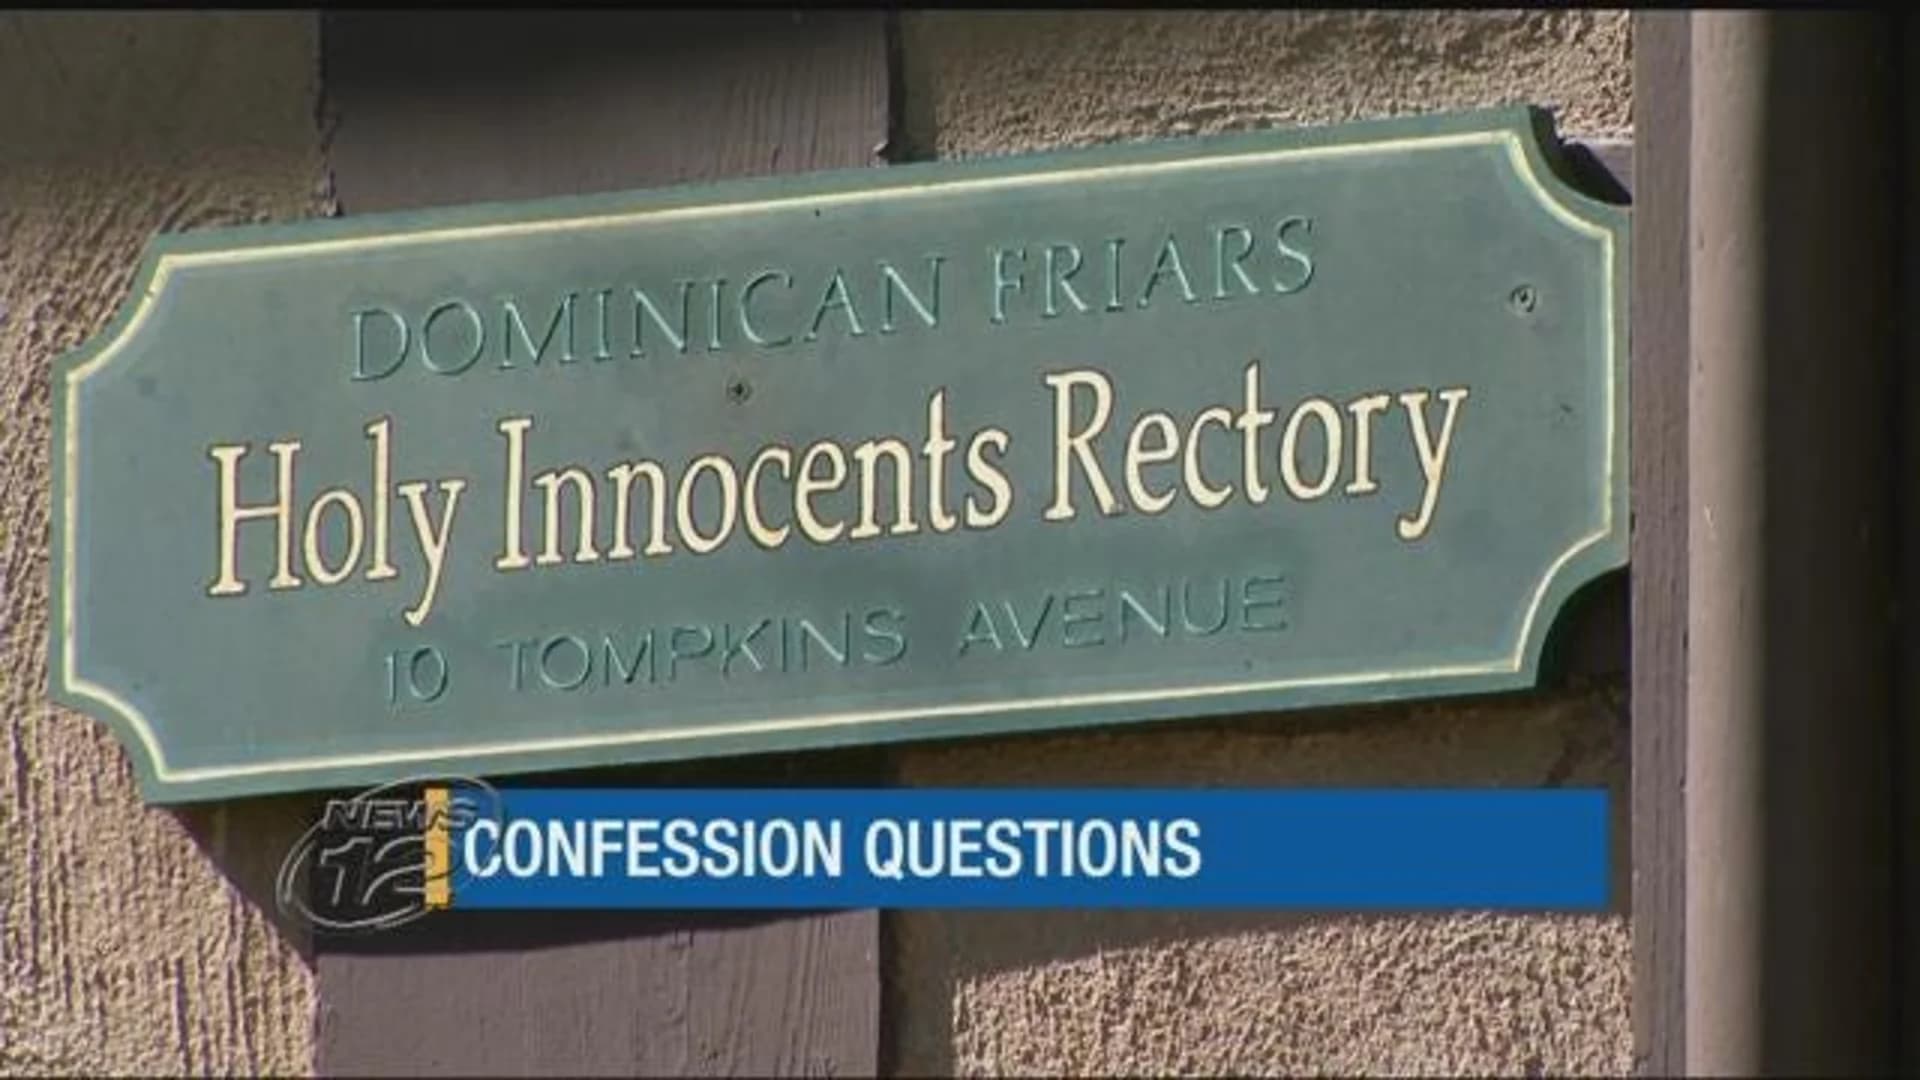 Parents: Sex questionnaire given to kids at confession crossed line of decency